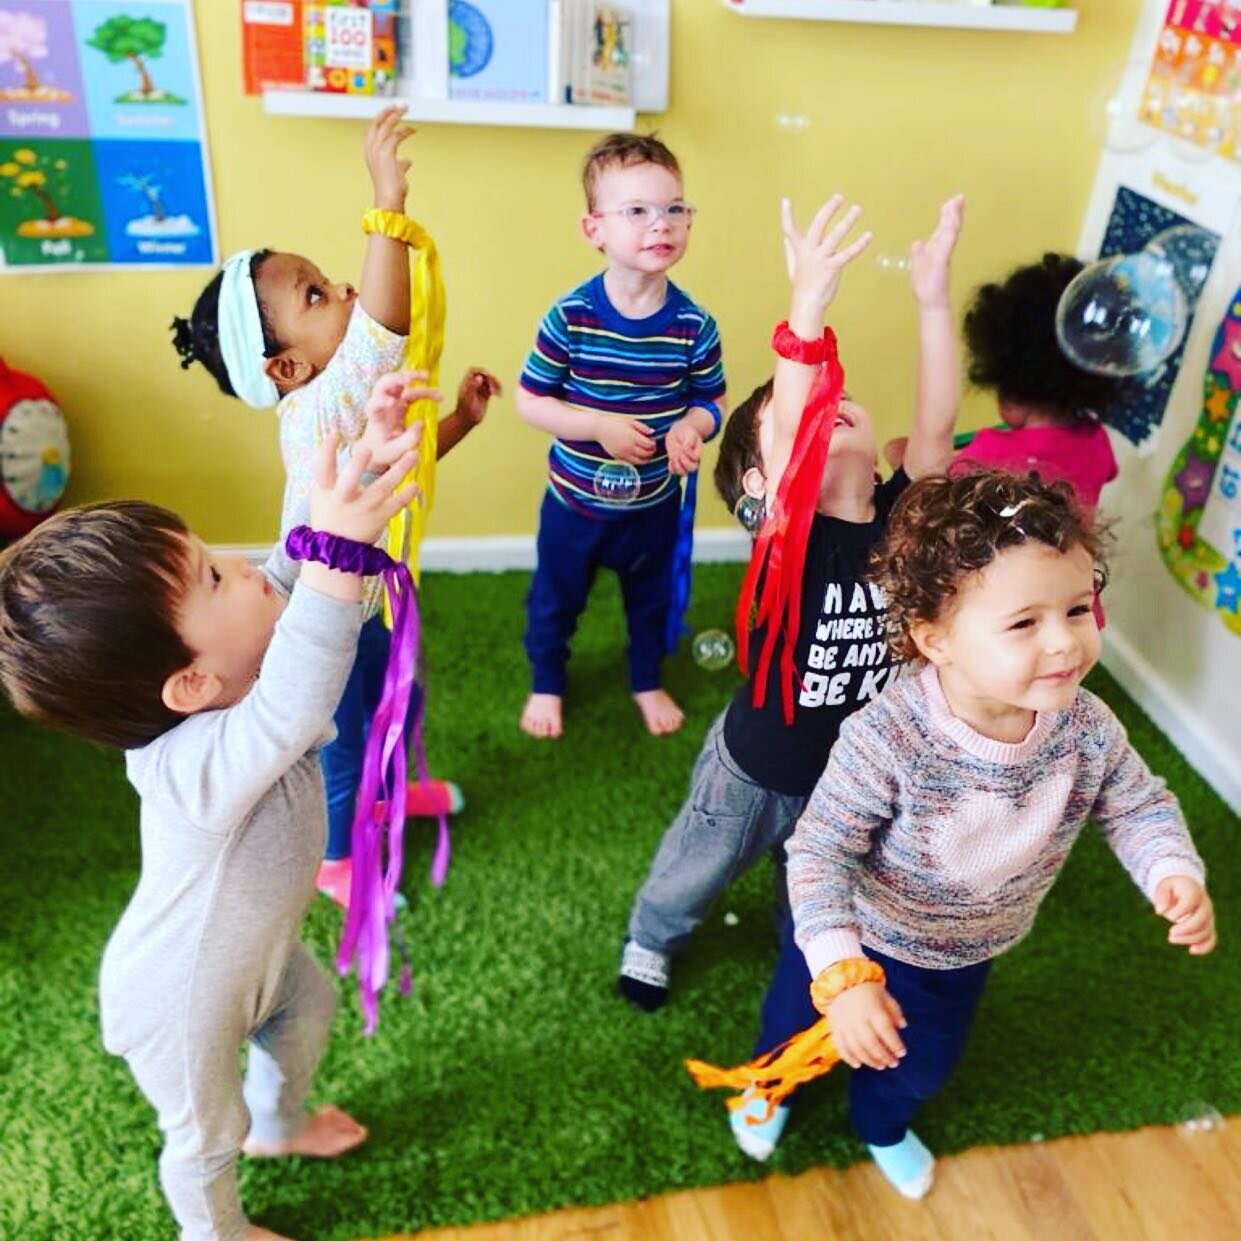 Reach for the stars ✨  Happy Tuesday ☀️ 
.
.
.
.
.
.

#toddlers #preschoolers #art #craft #explore #imagination #development #happy #loving #caring #dedicated #effectiveteaching #milestones #growth #homeschooling  #playathome #daycare #childcare #tea